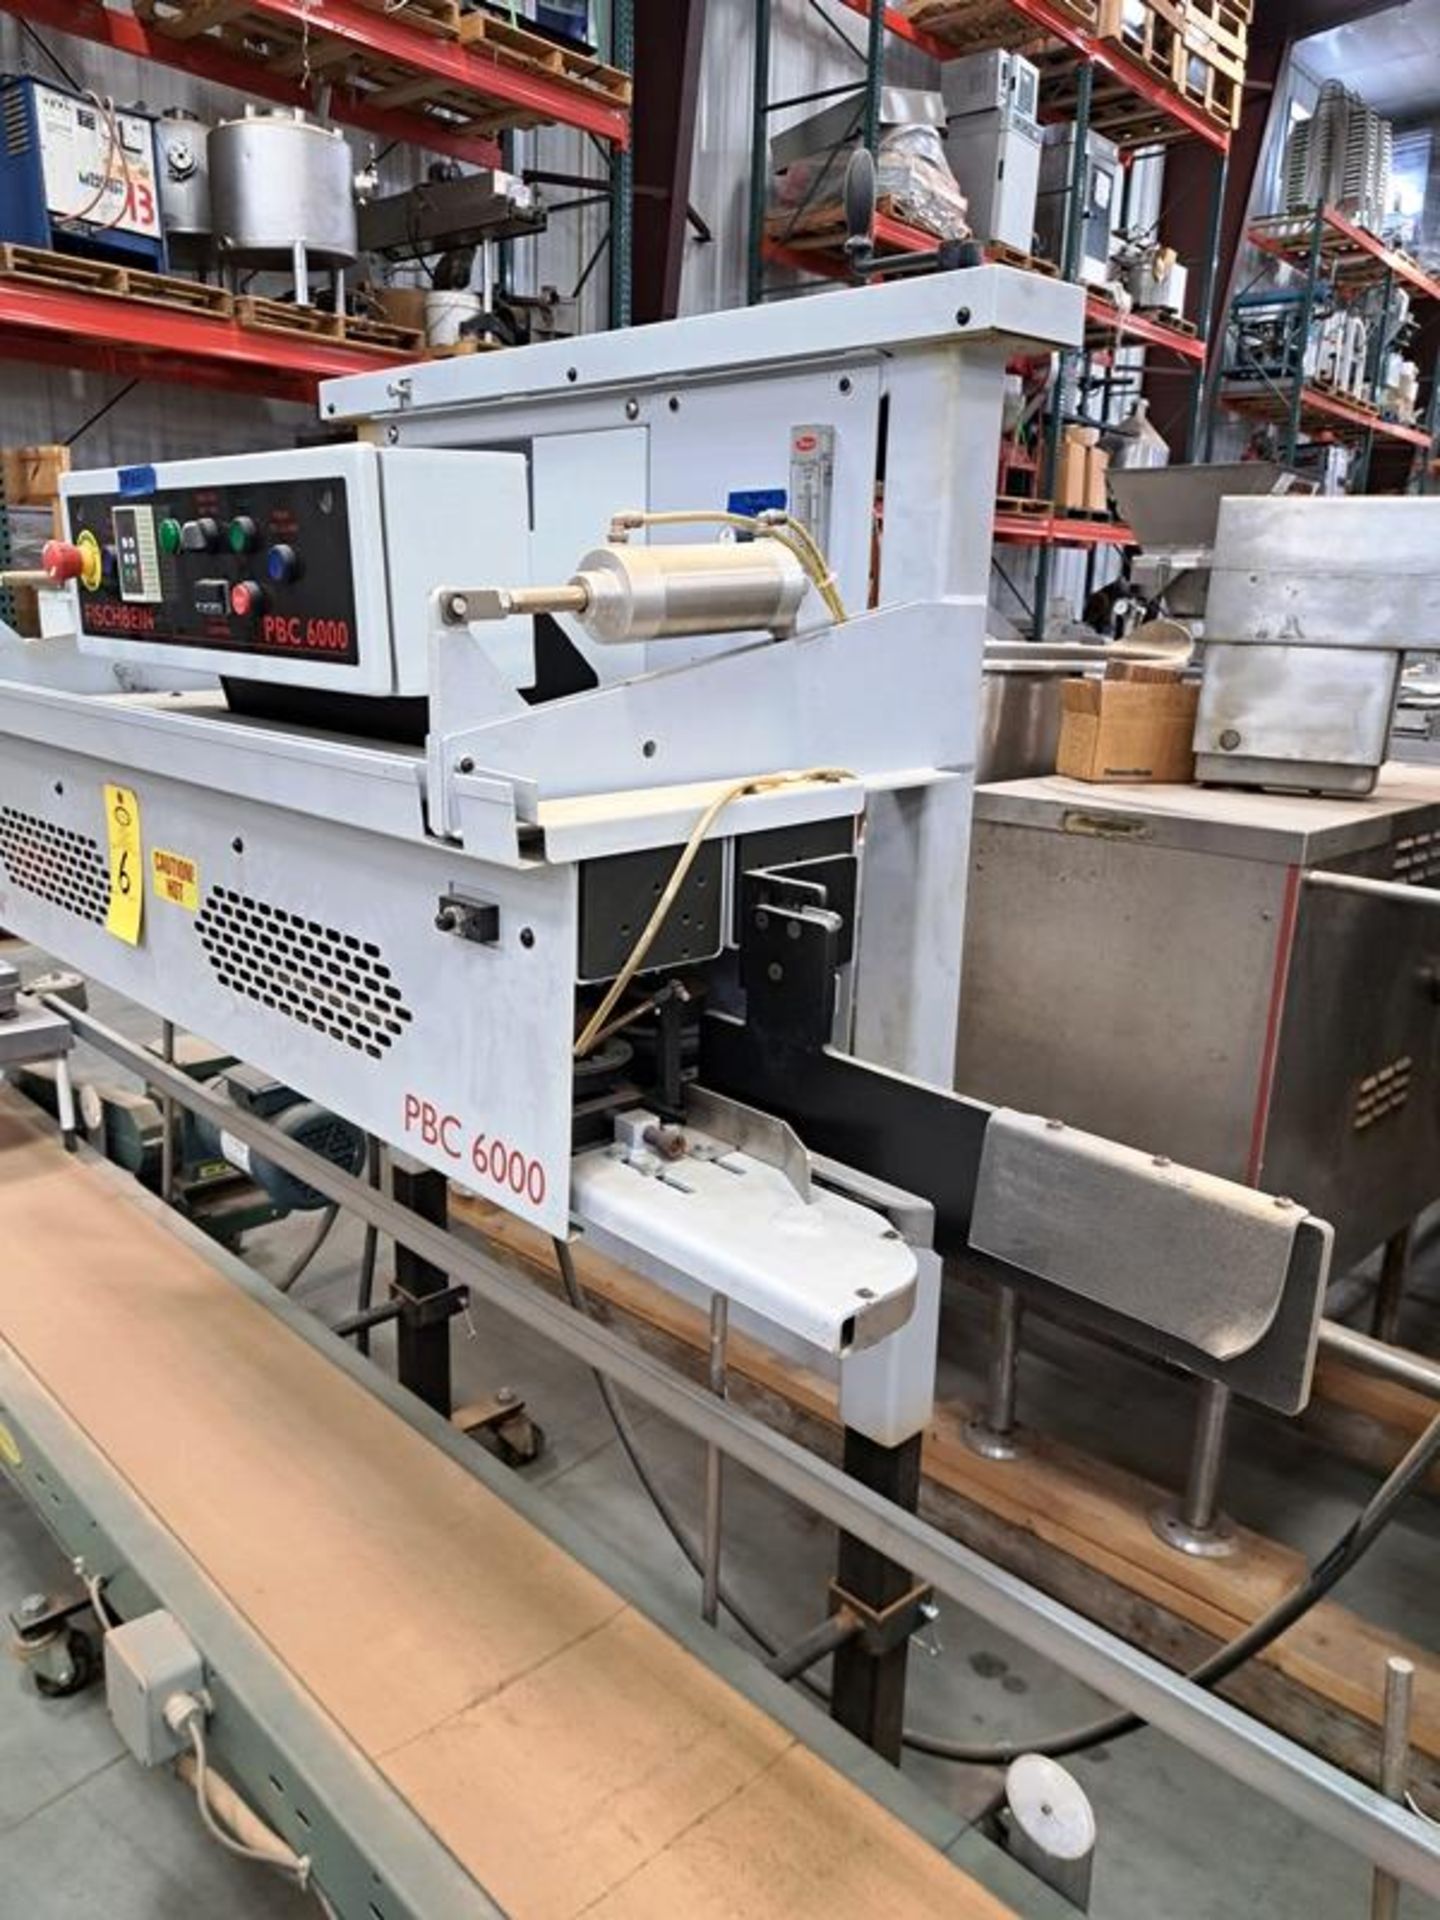 Fischbein Mdl. PBC6000 Continuous Band Sealer, manual controls, digital PBC151111101 readout, 12" - Image 4 of 9